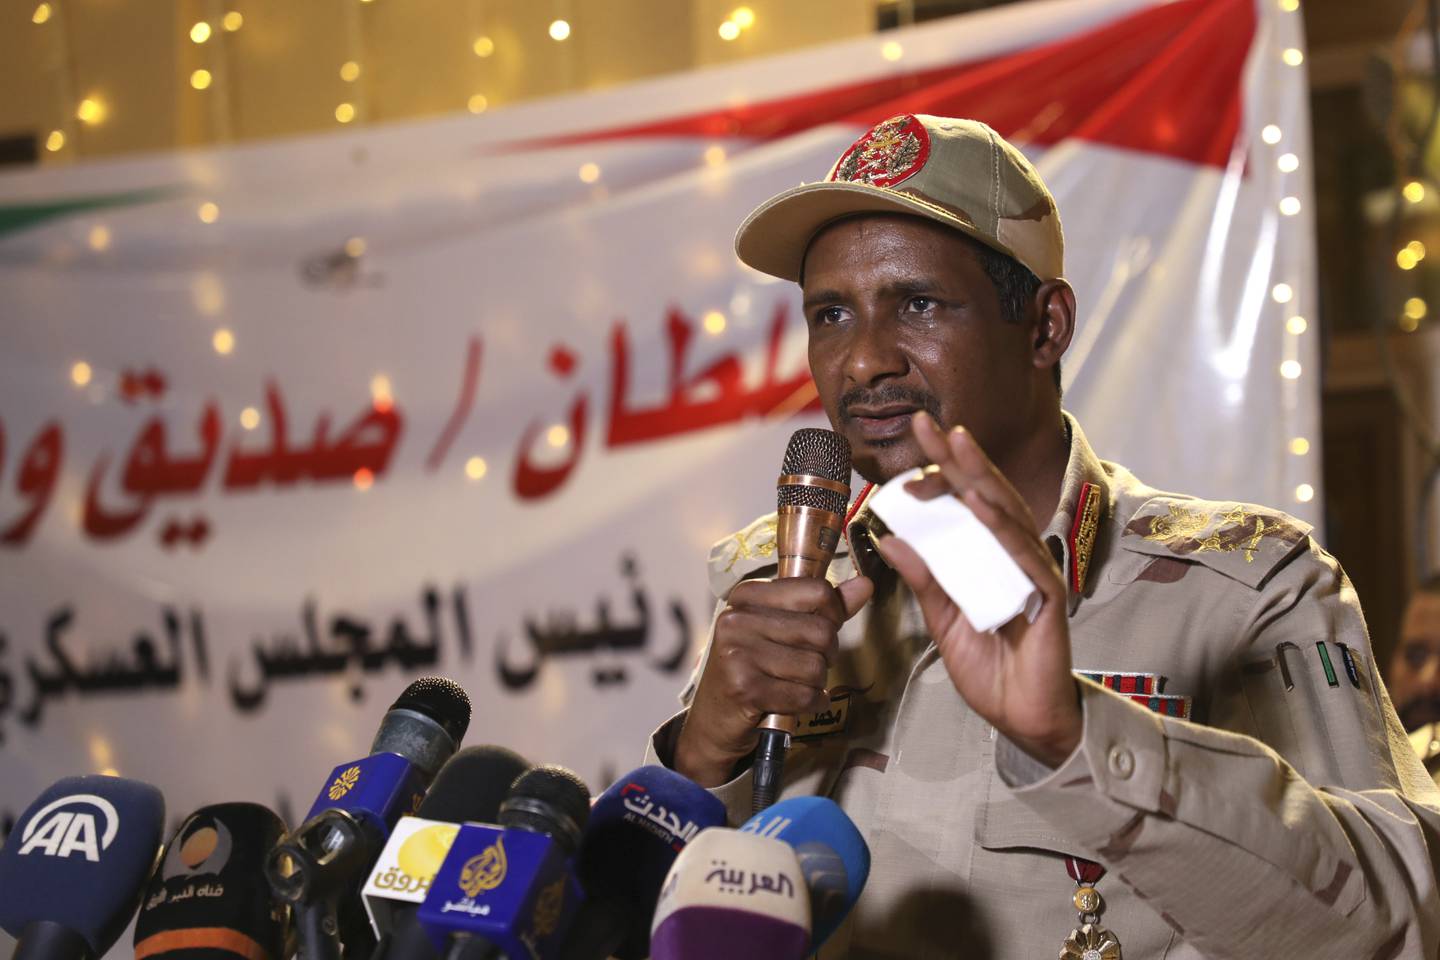 Mohamed Hamadan Dagolo, also known as Himedti, deputy head of the ruling military council of Sudan, speaks to the press in the capital Khartoum on May 28, 2019. (Photo by STR / AFP)